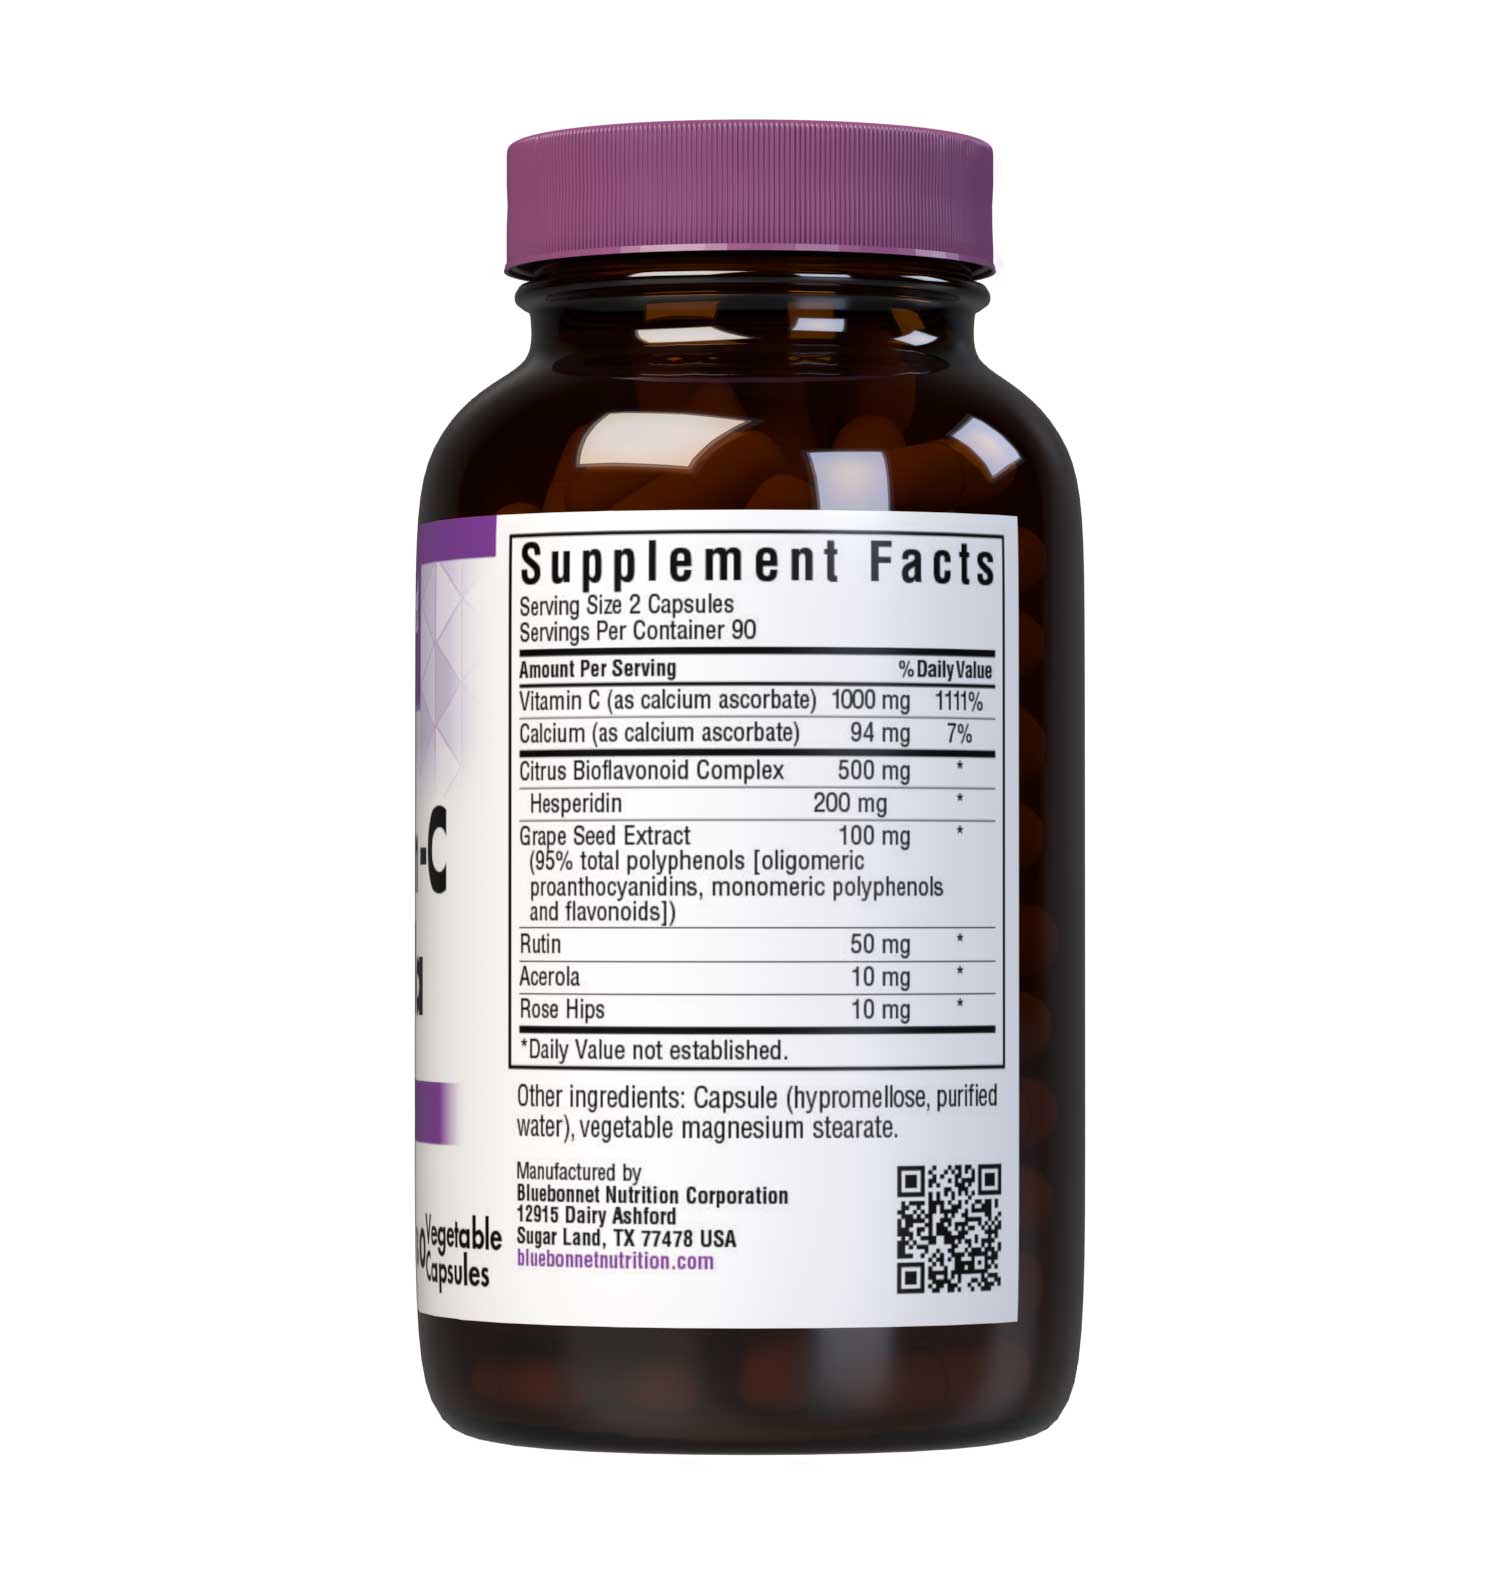 Bluebonnet’s Optimum-C Formula 180 Vegetable Capsules are formulated with non-GMO, identity preserved (IP) vitamin C from calcium ascorbate, rose hips and acerola along with citrus bioflavonoids and grape seed extract to help support immune function. Supplement facts panel. #size_180 count